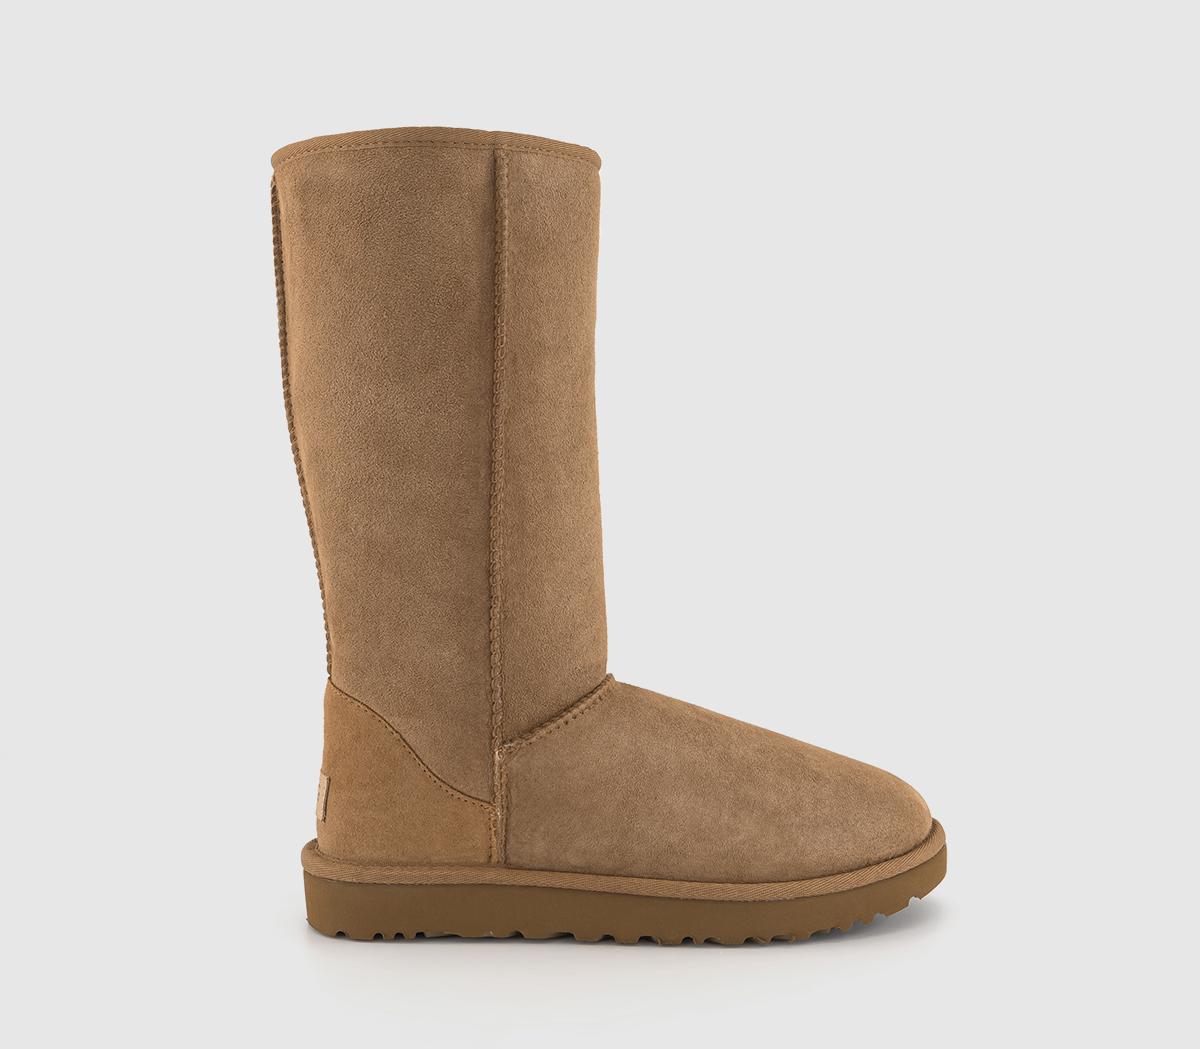 UGG Classic Tall II Boots Chestnut Suede - Knee High Boots